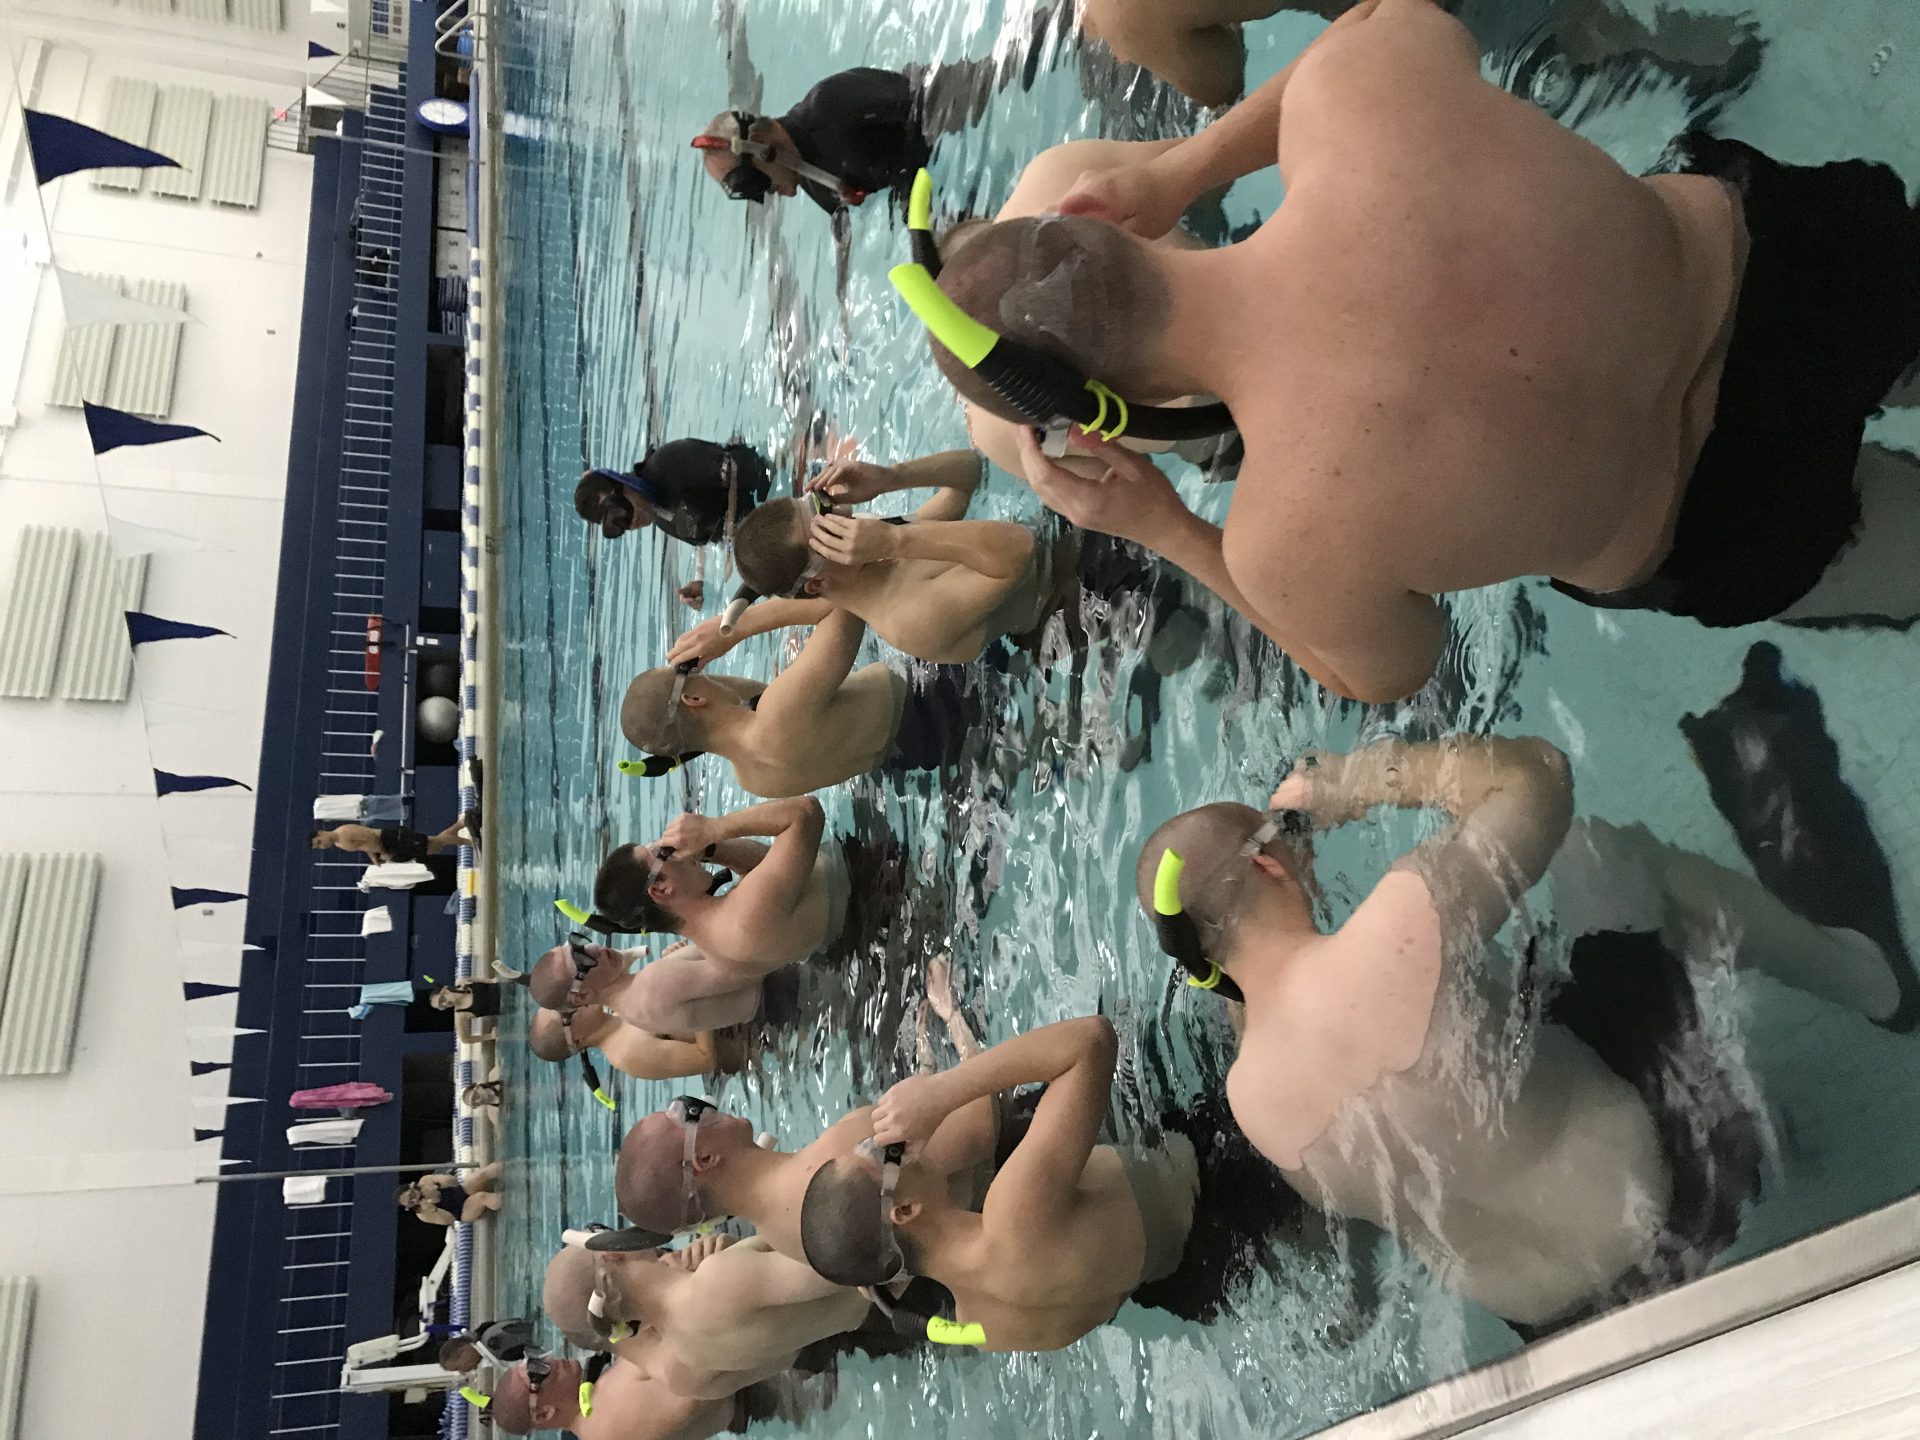 scuba diver instructors teaching how to breathe underwater in pool